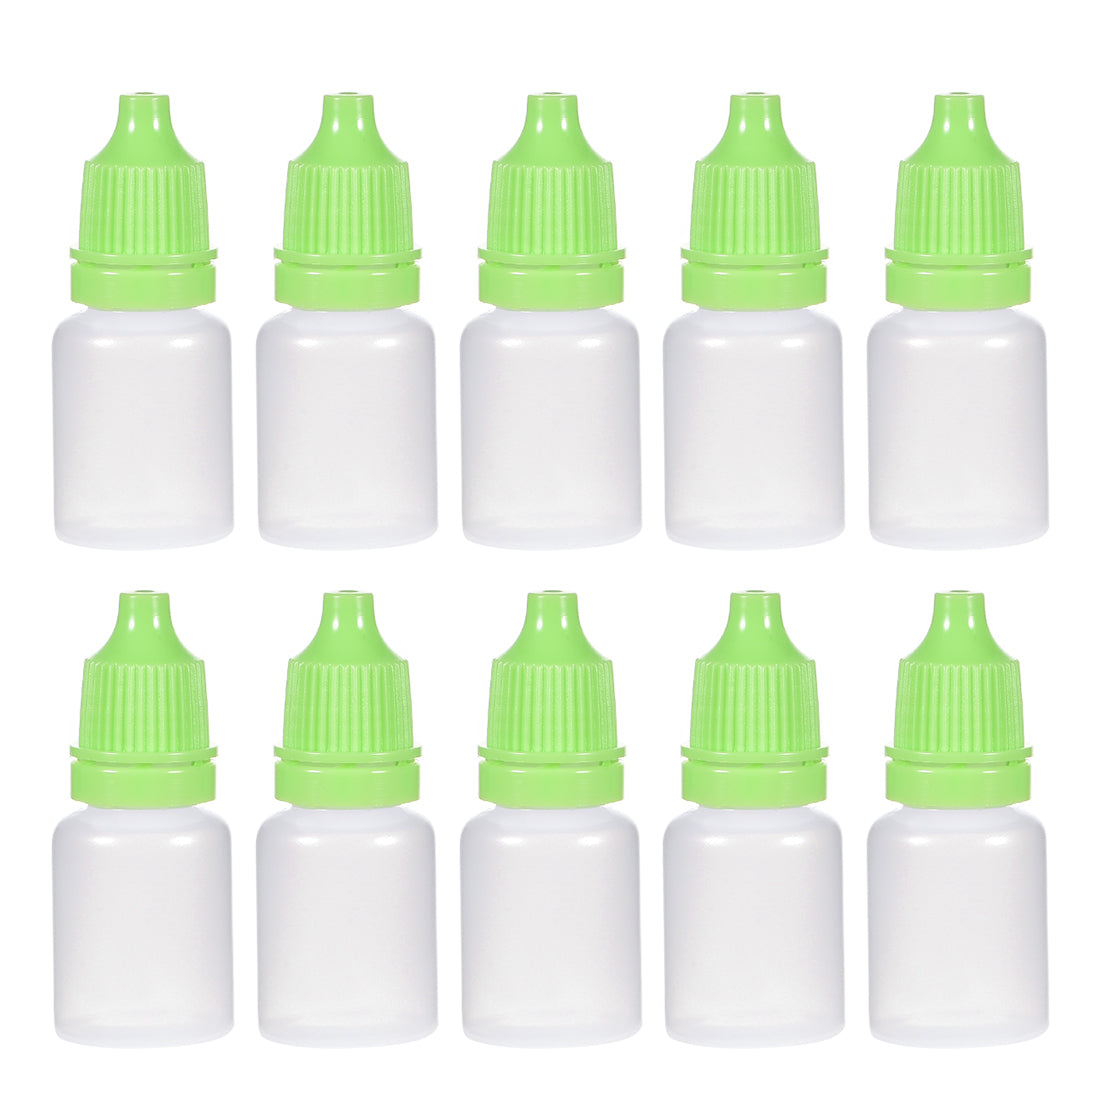 uxcell Uxcell 5ml/0.17 oz Empty Squeezable Dropper Bottle Green 50pcs